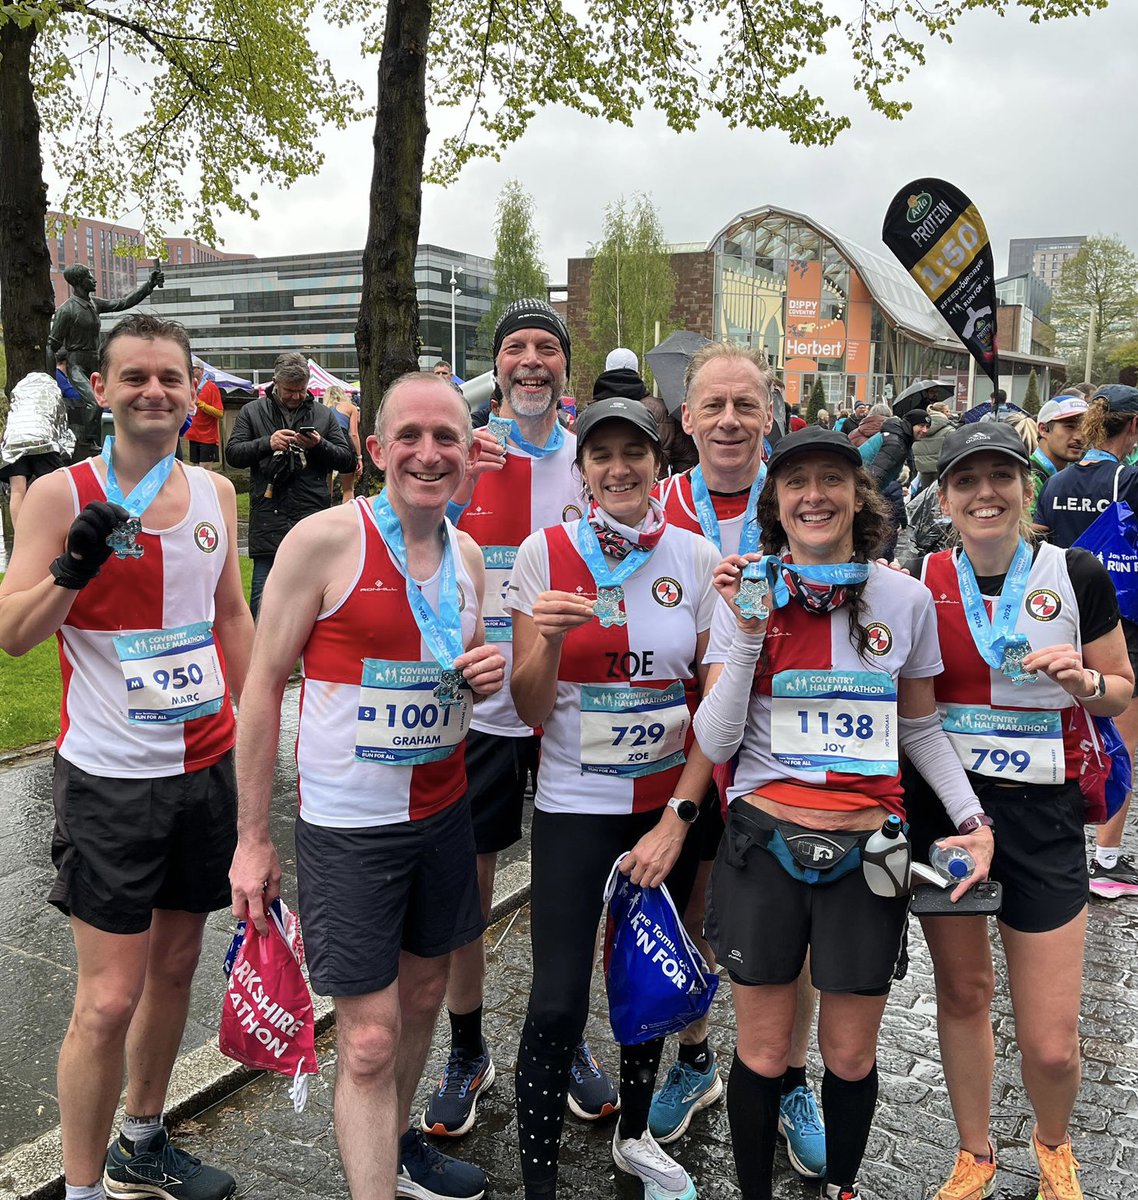 A huge congratulations to today’s finishers 🤩 #CoventryHalfMarathon Despite the torrential rain you all smashed it 🙌🙌🙌